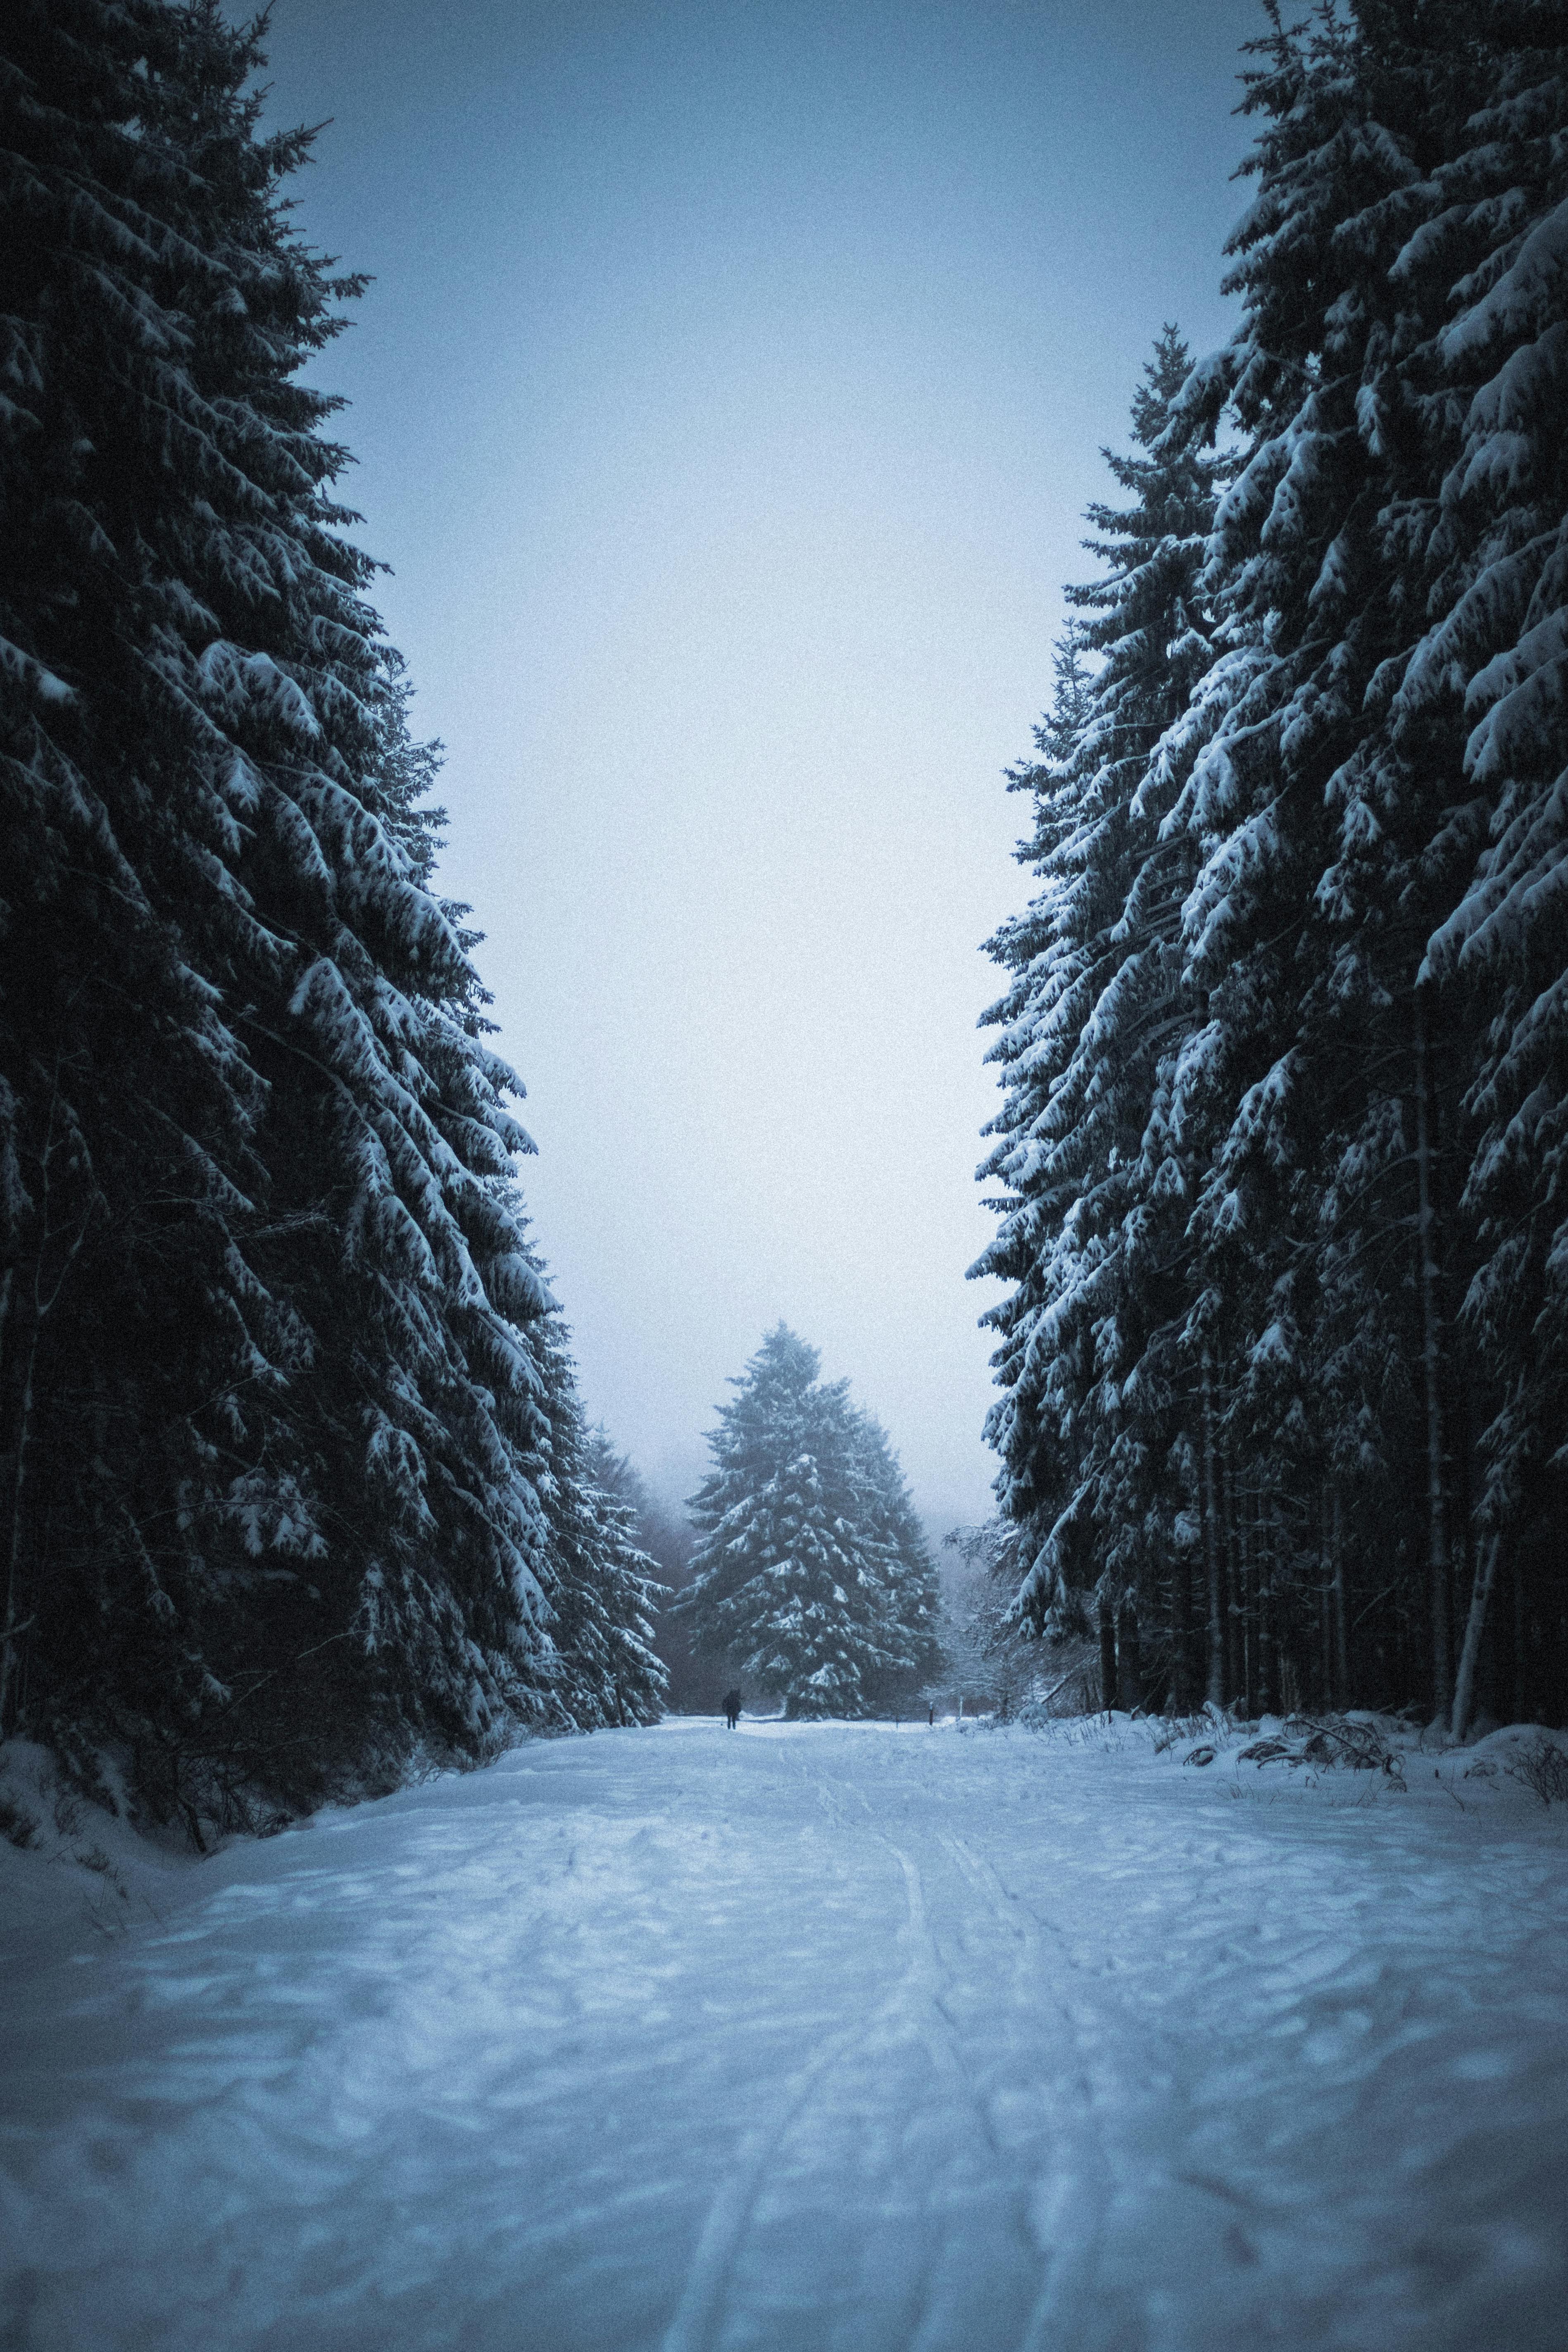 evergreen trees in winter